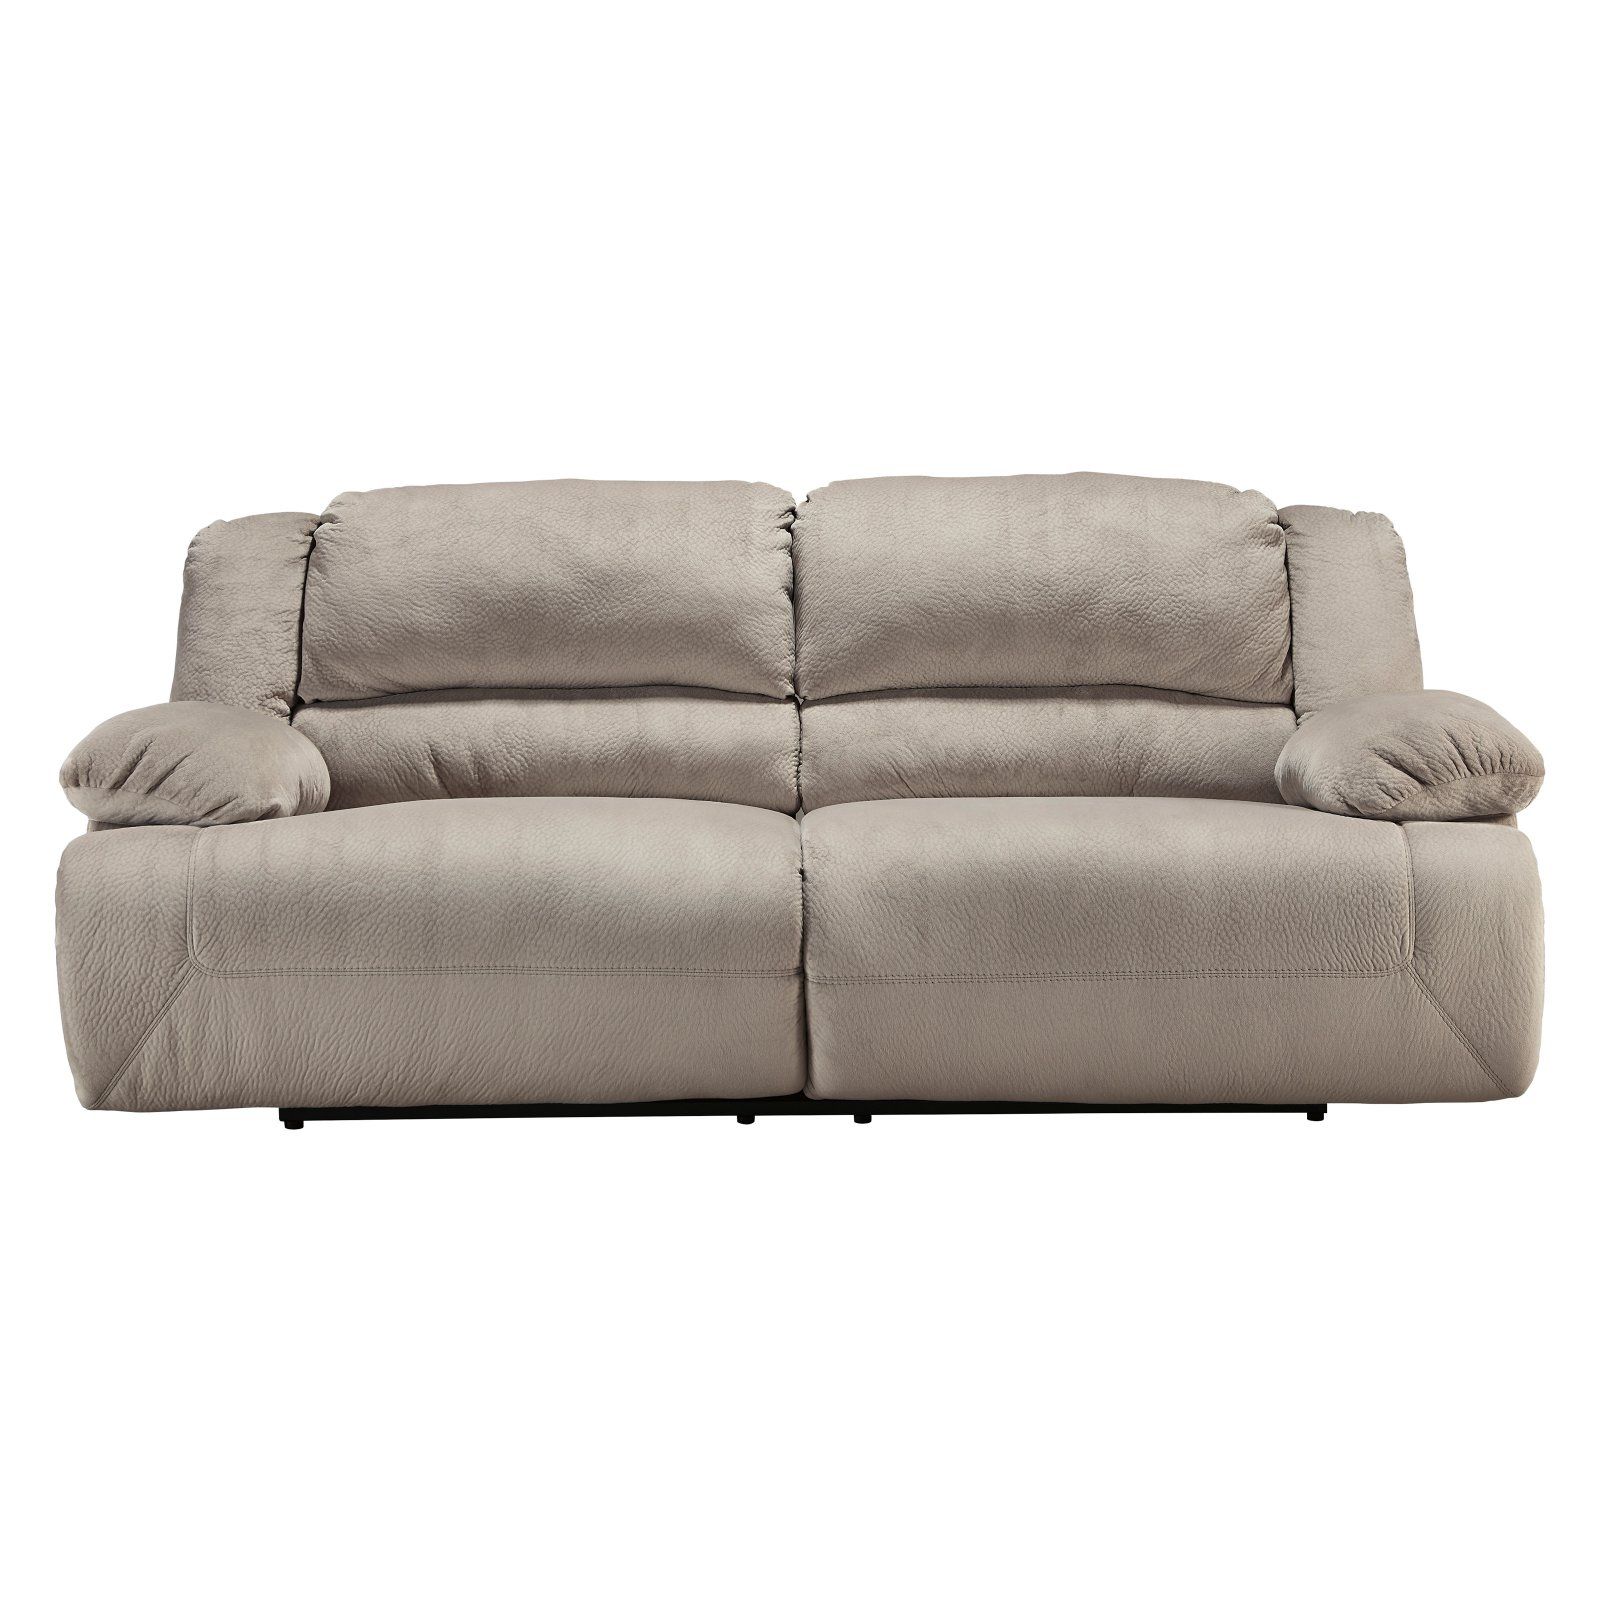 Signature Designashley Toletta Power Reclining Sofa Intended For Power Reclining Sofas (View 14 of 15)